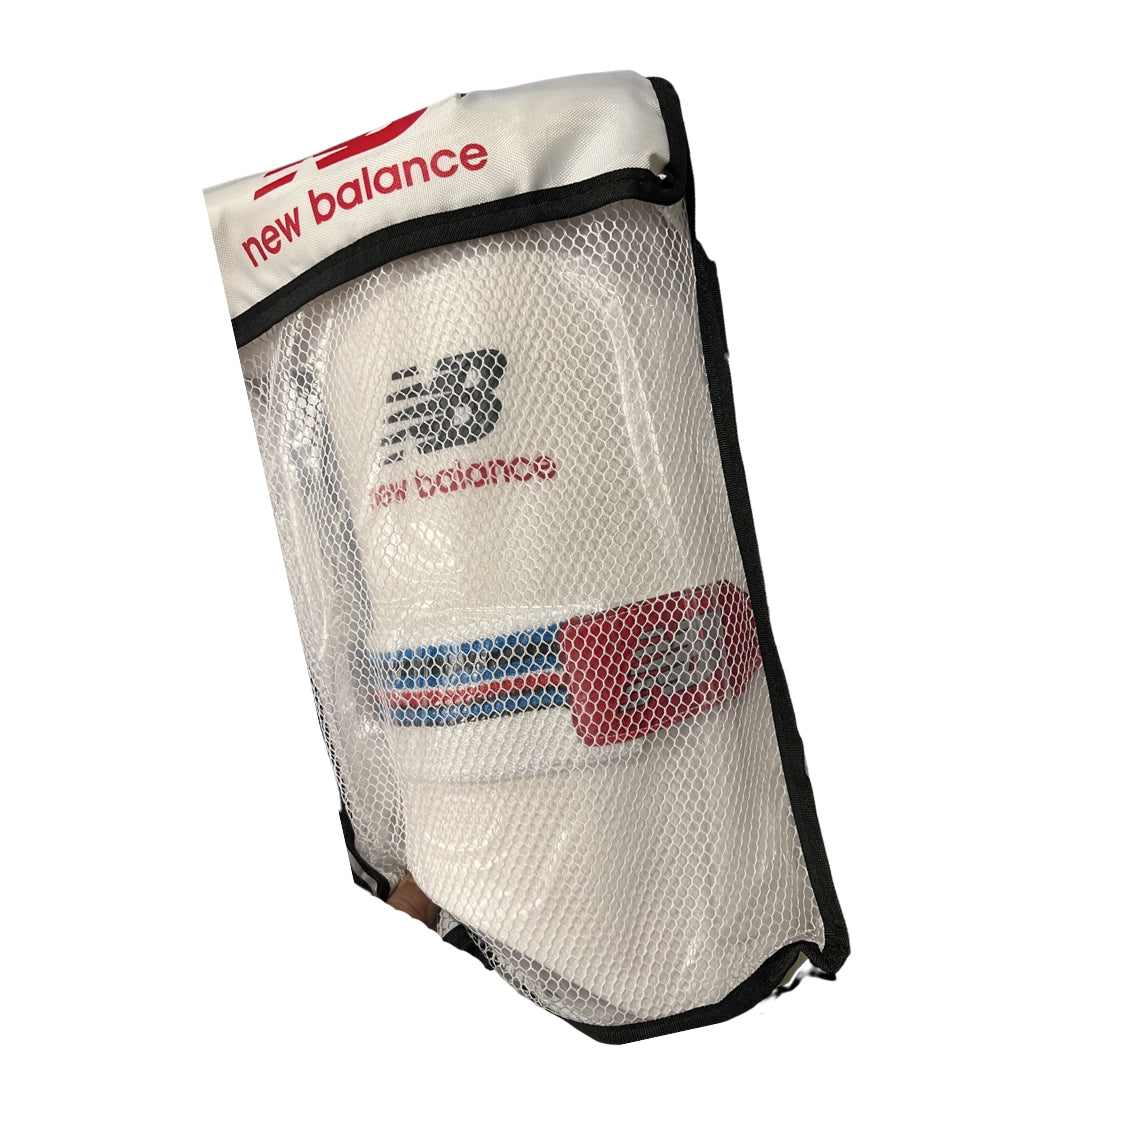 New Balance Double Thigh Pads